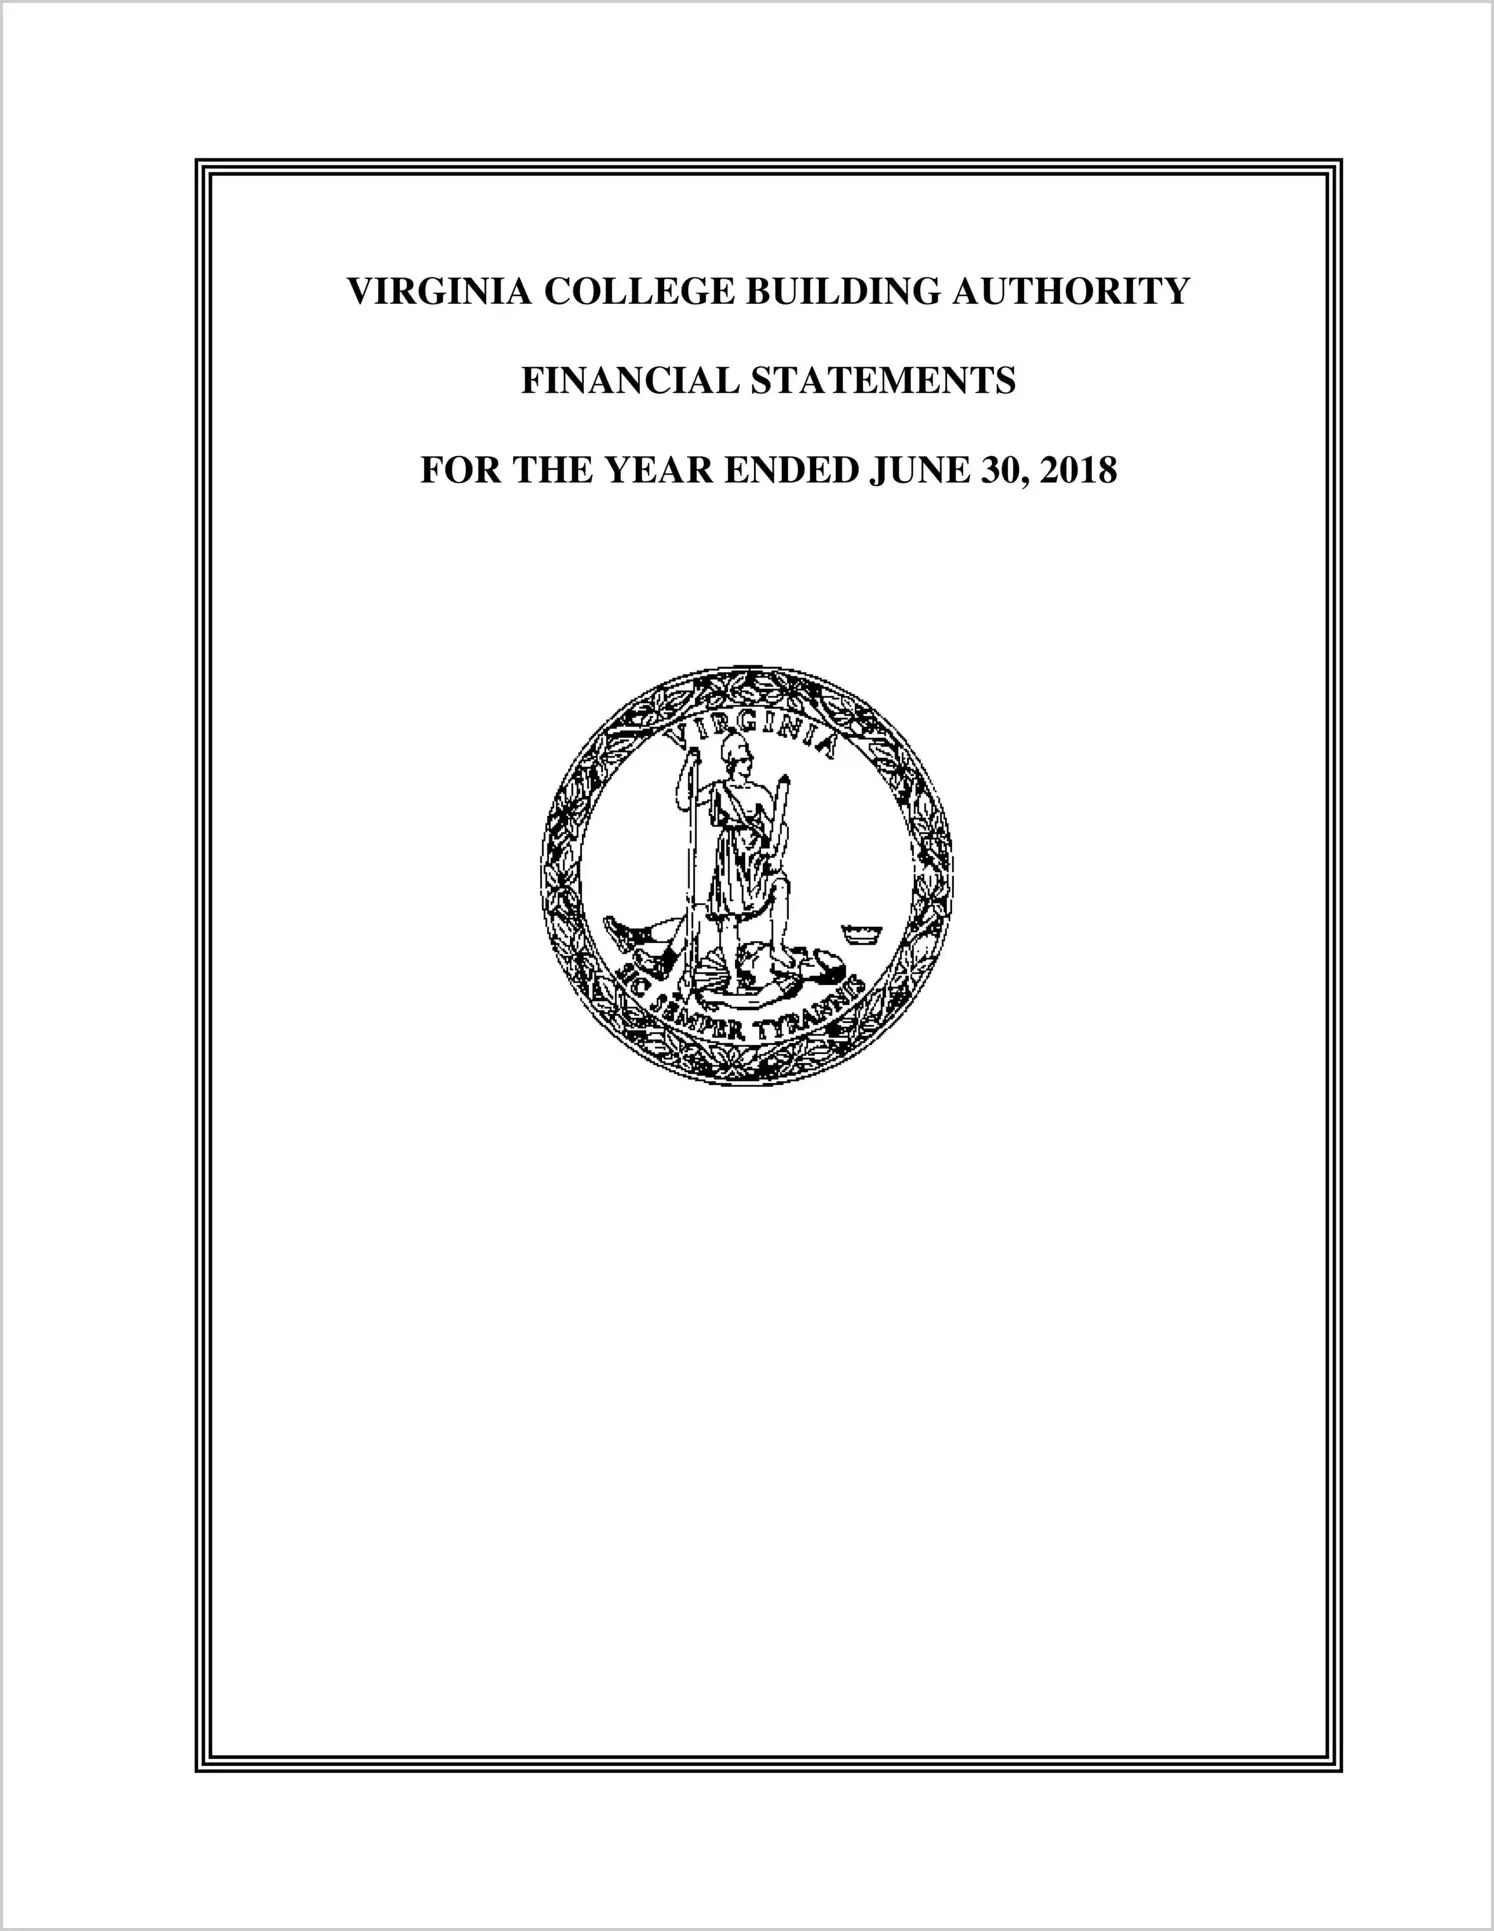 Virginia College Building Authority Financial Statements for the year ended June 30, 2018